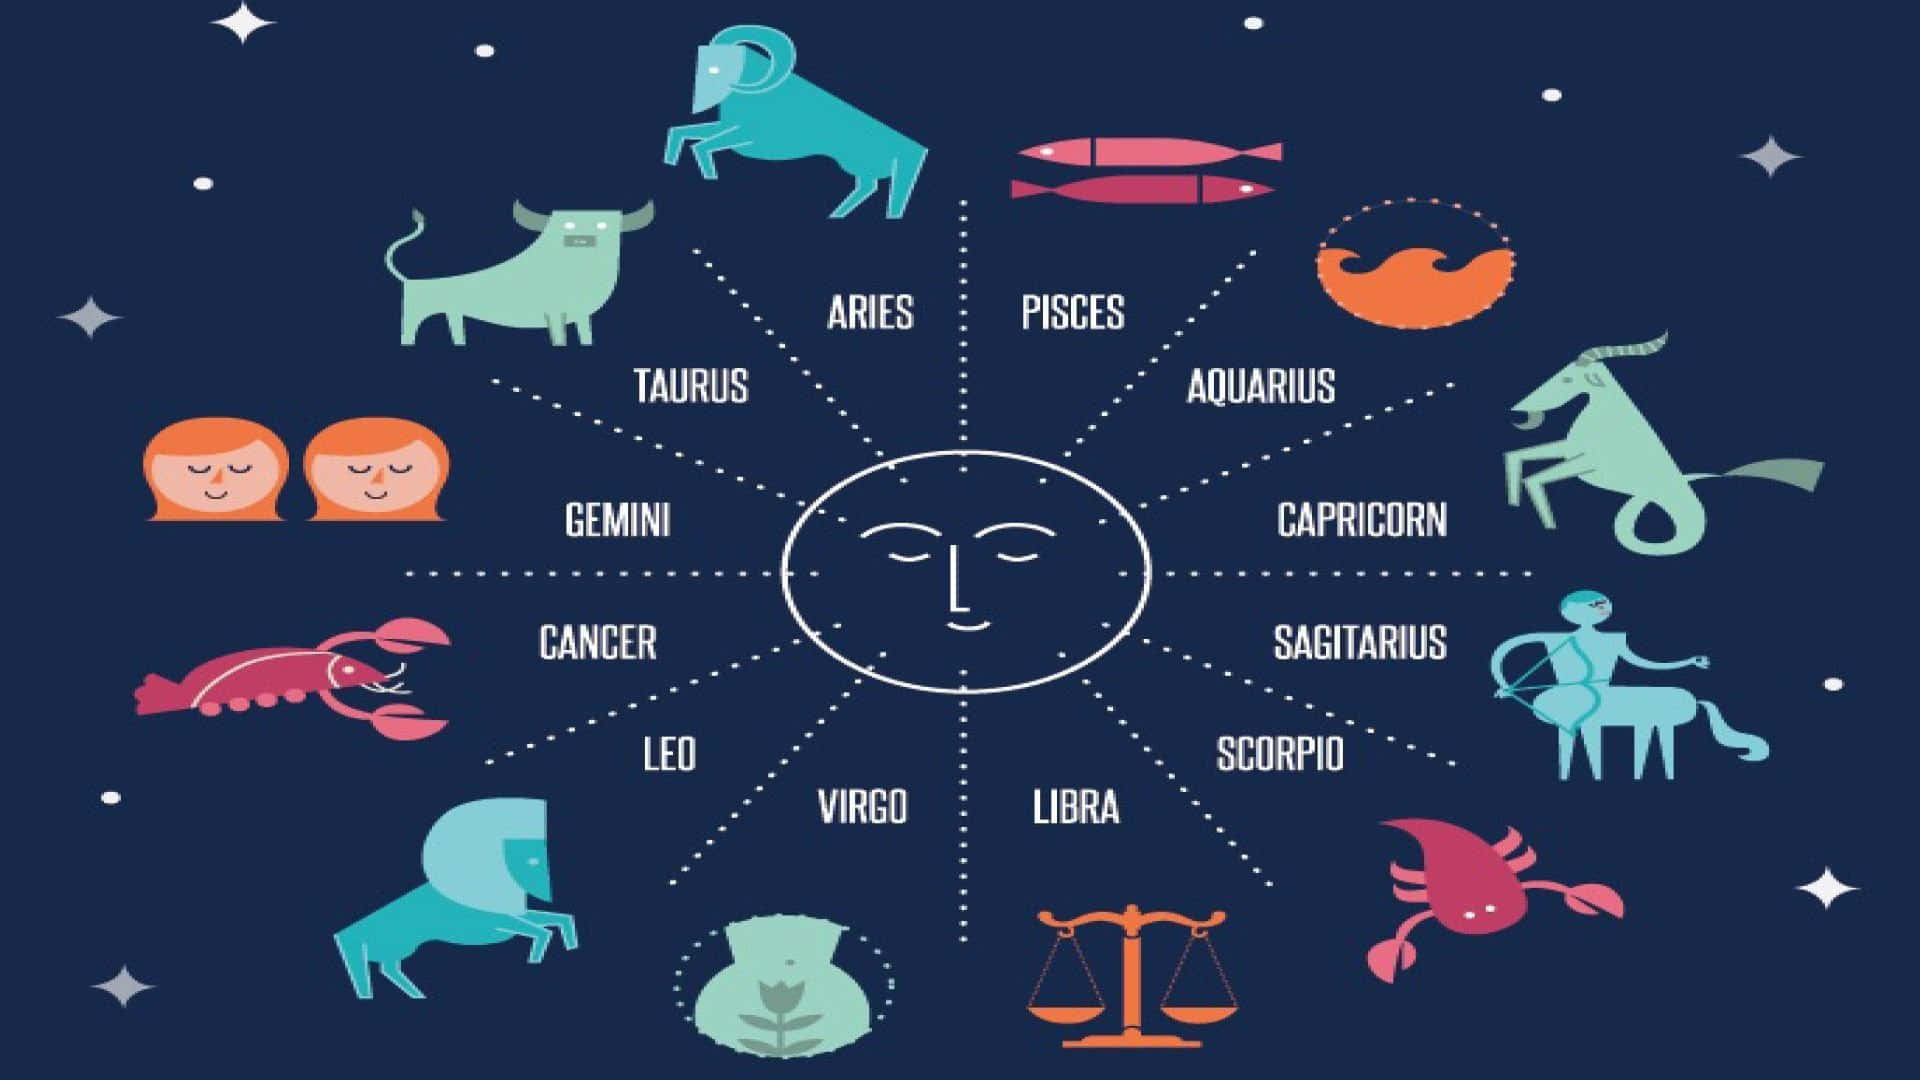 Zodiac Signs In The Circle With Stars